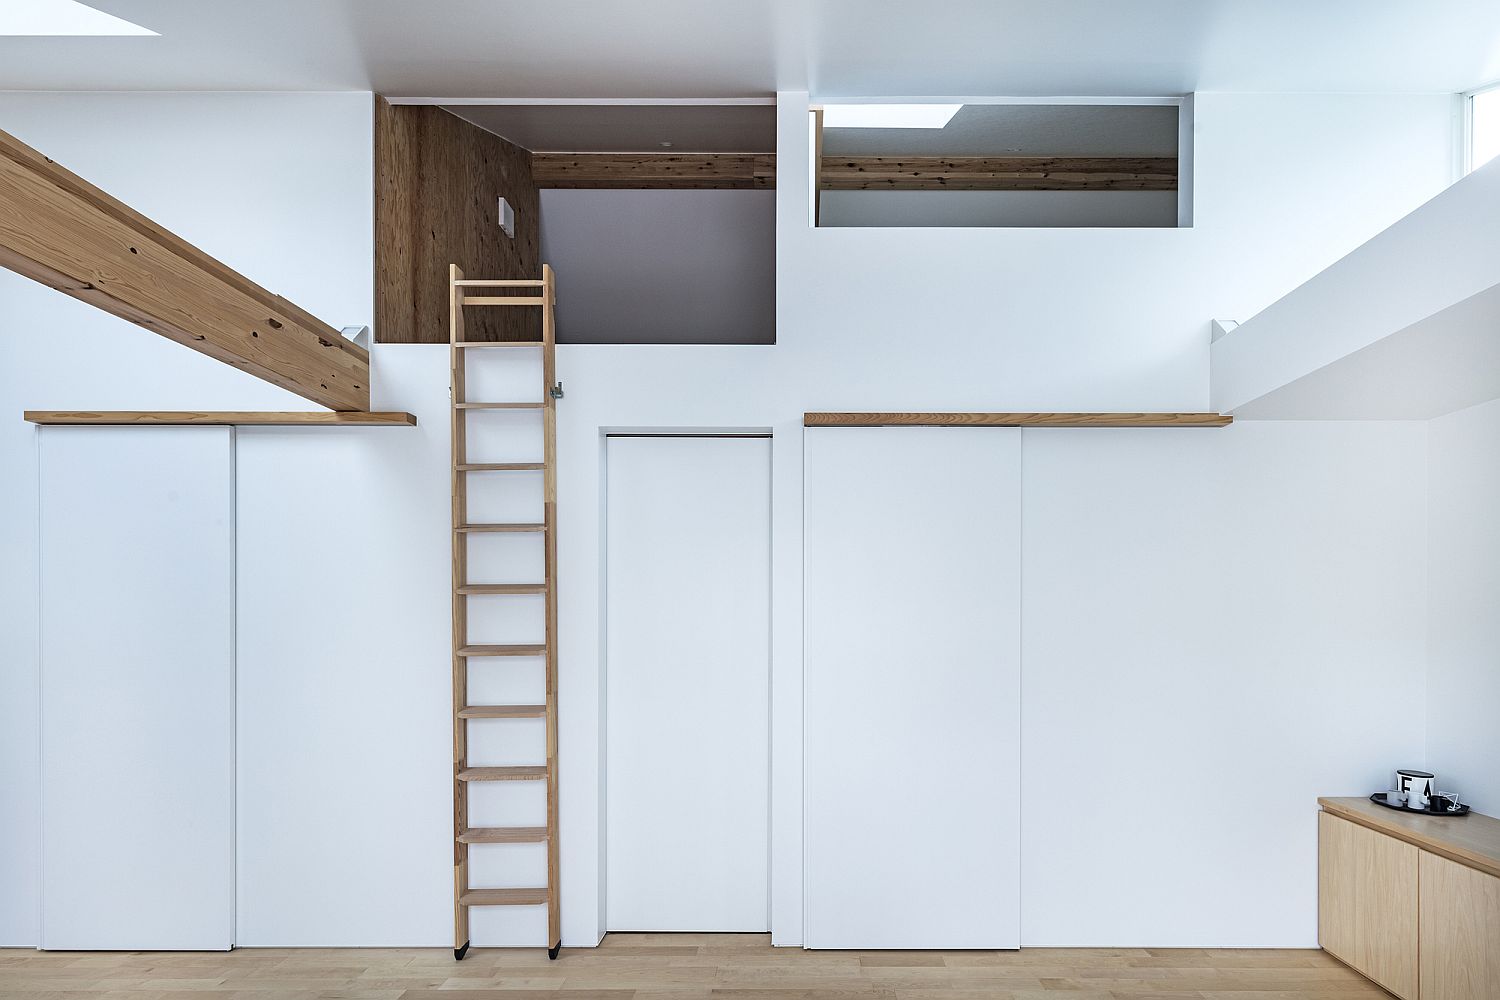 Ladder-leading-to-the-loft-level-inside-the-Japanese-home